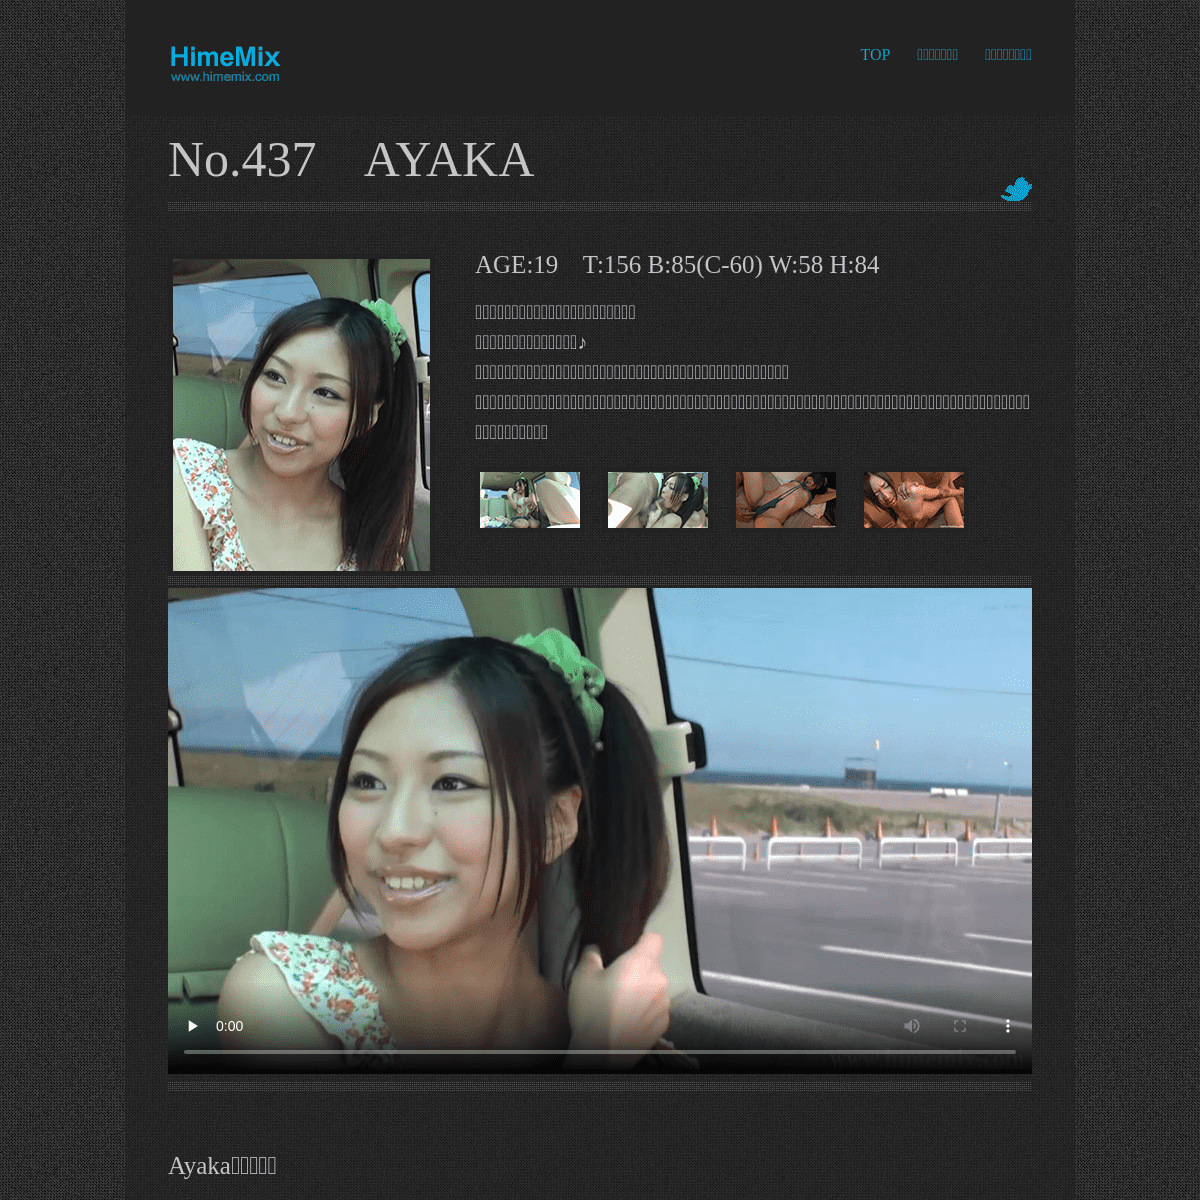 A complete backup of http://st.himemix.com/girl/437ayaka/